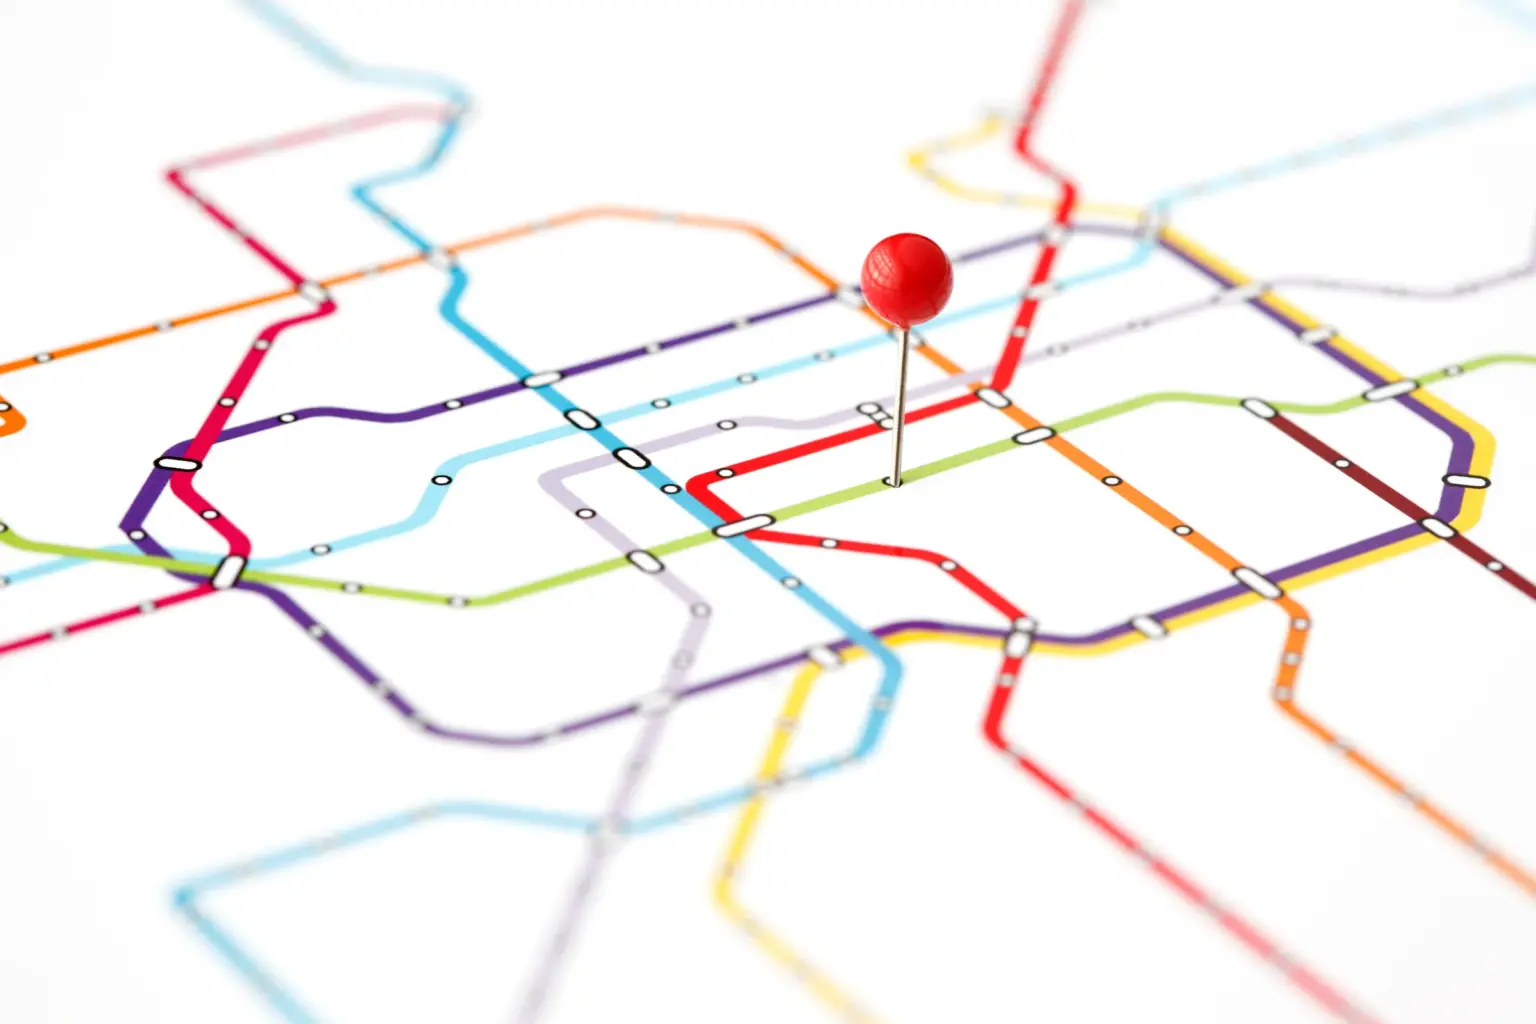 A computer-generated fictional map of train lines, containing colourful lines criss-crossing the page. A red pin clothespin sticks from up from the centre of the paper.